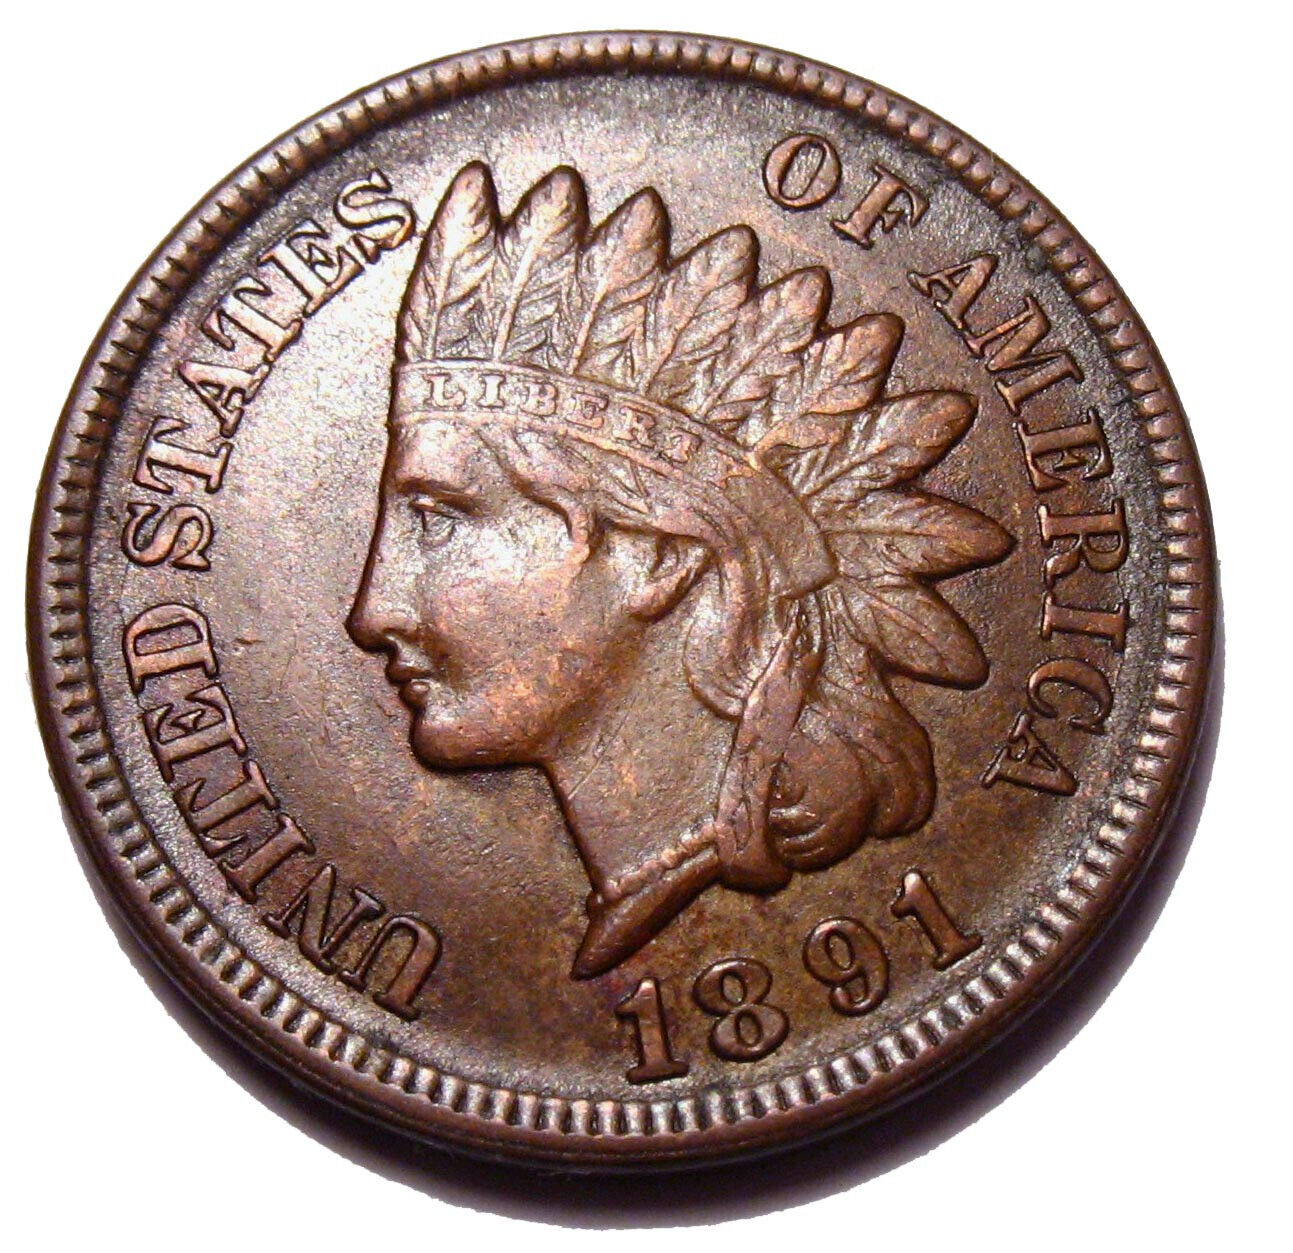 OLD US COINS 1891 INDIAN HEAD CENT PENNY FULL LIBERTY BEAUTY